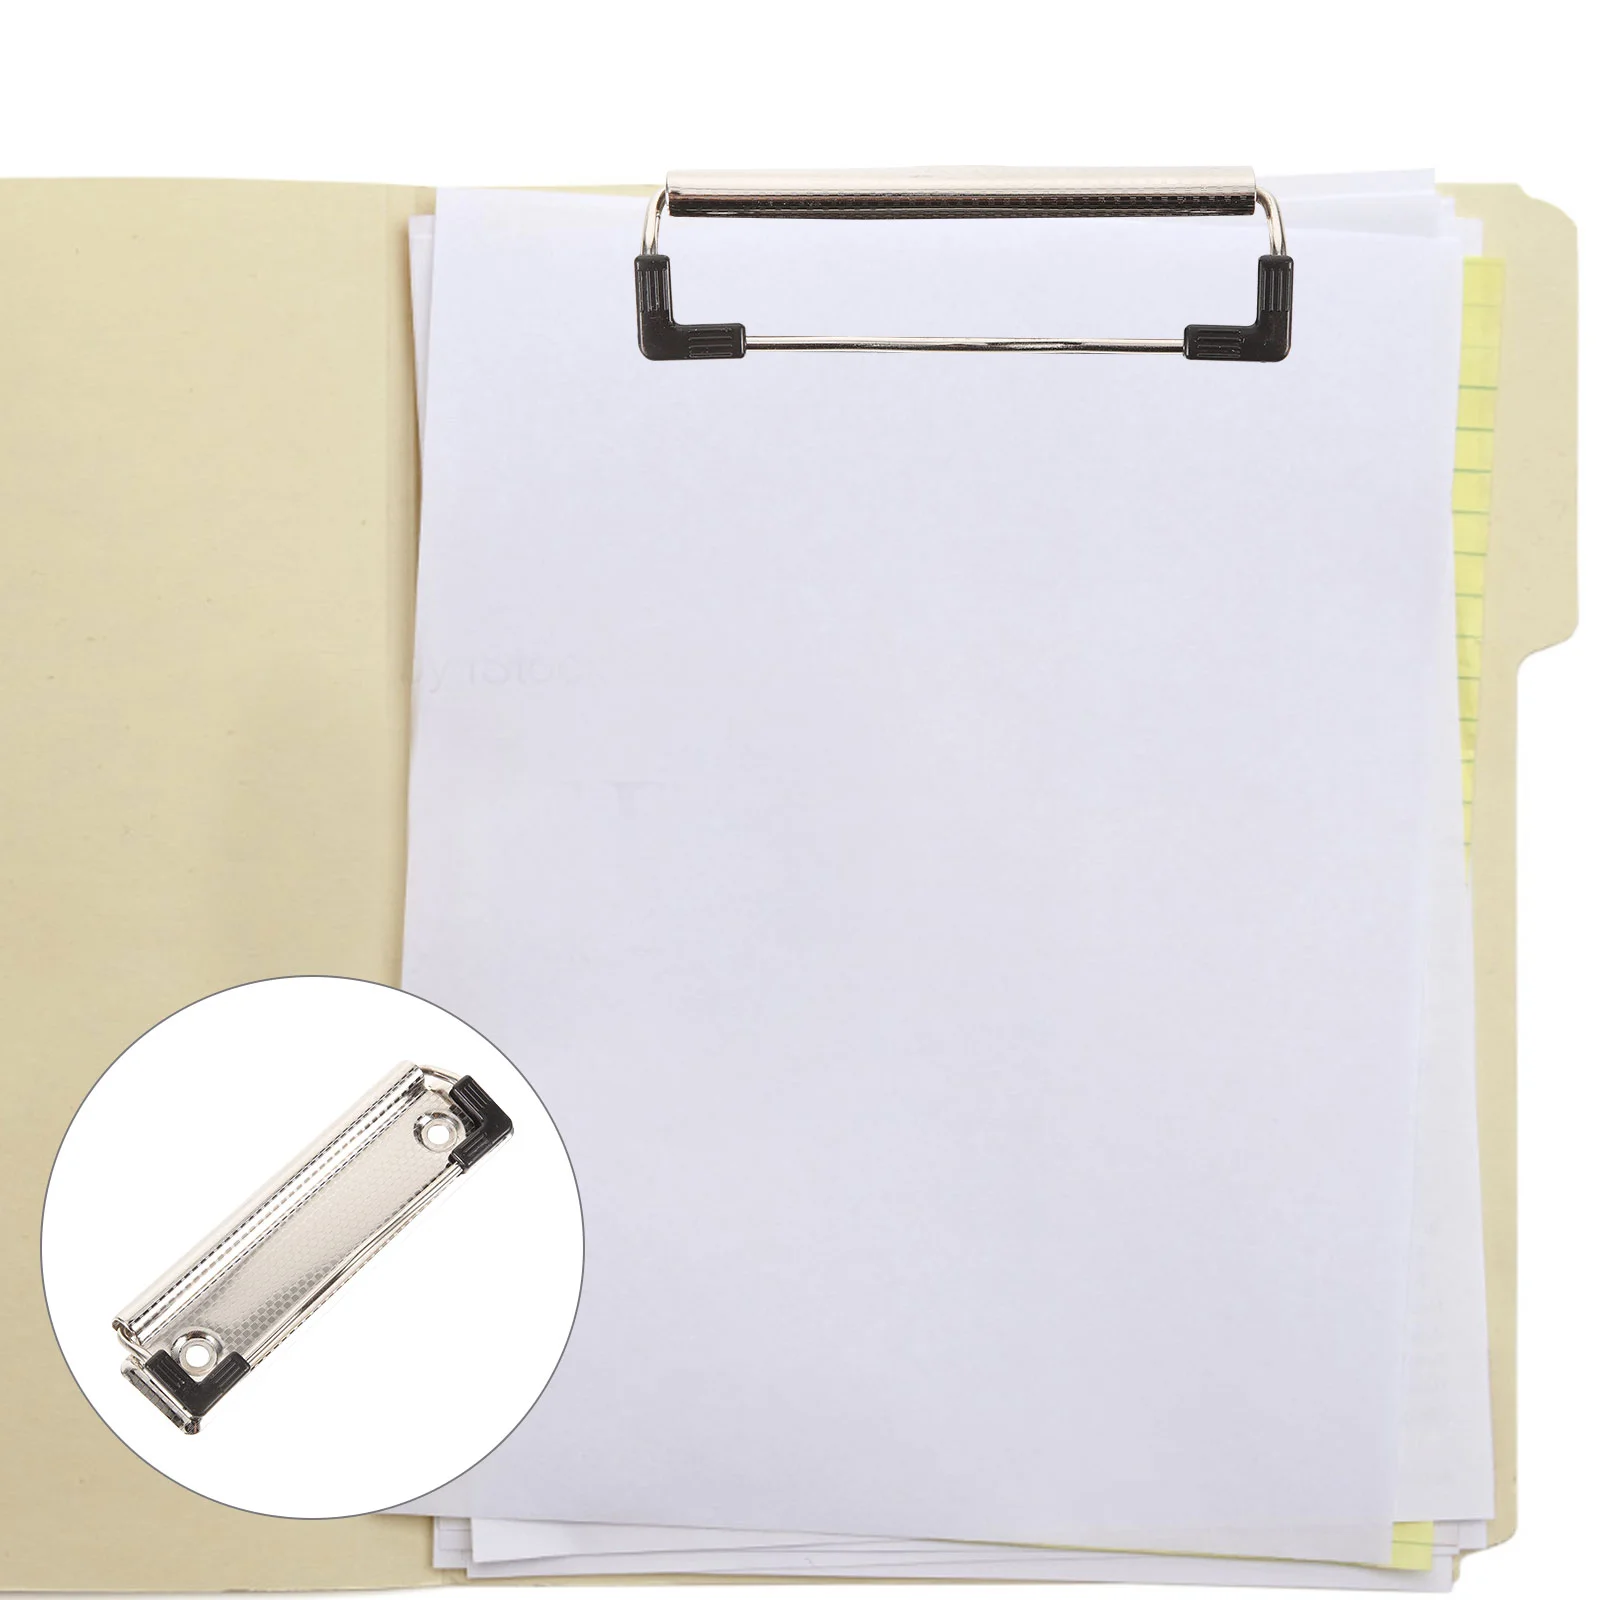 

10 Pcs Multifunctional File Folder Document Board Clips Office Supply Nursing Clipboard Contractors Writing Pad Holder